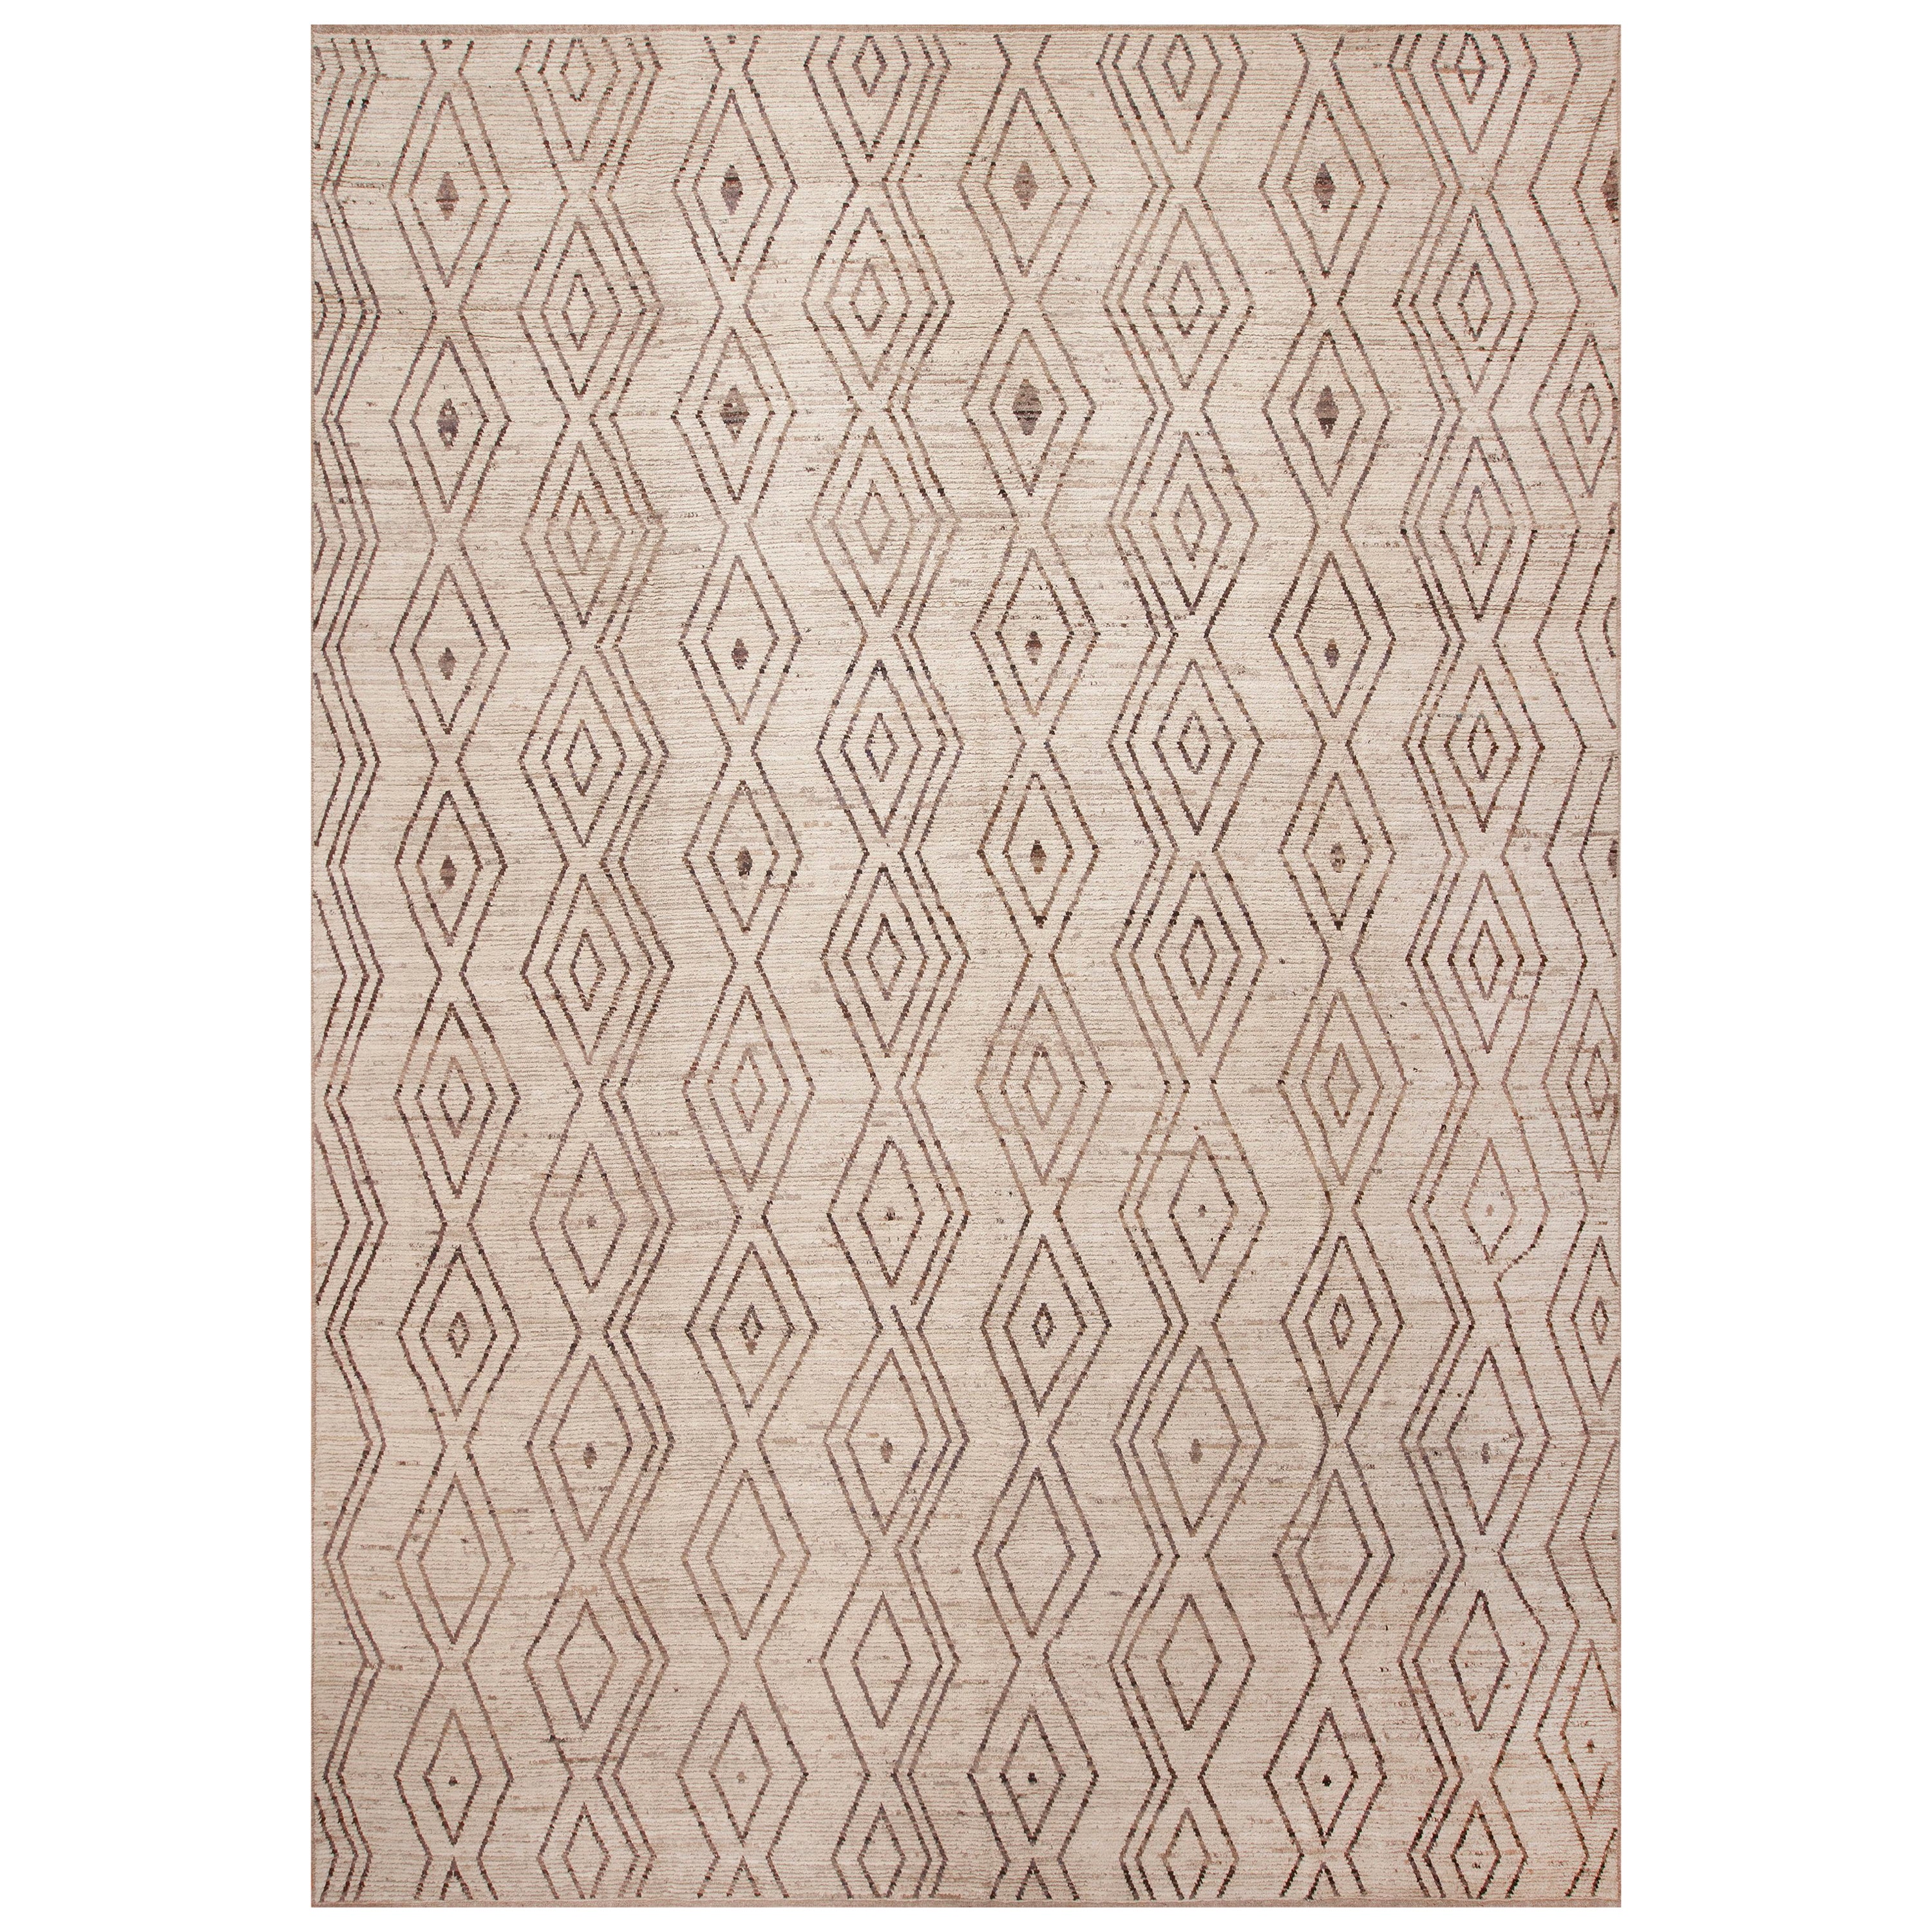 Nazmiyal Collection Modern Berber Beni Ourain Design Area Rug 12'6" x 18'2" For Sale